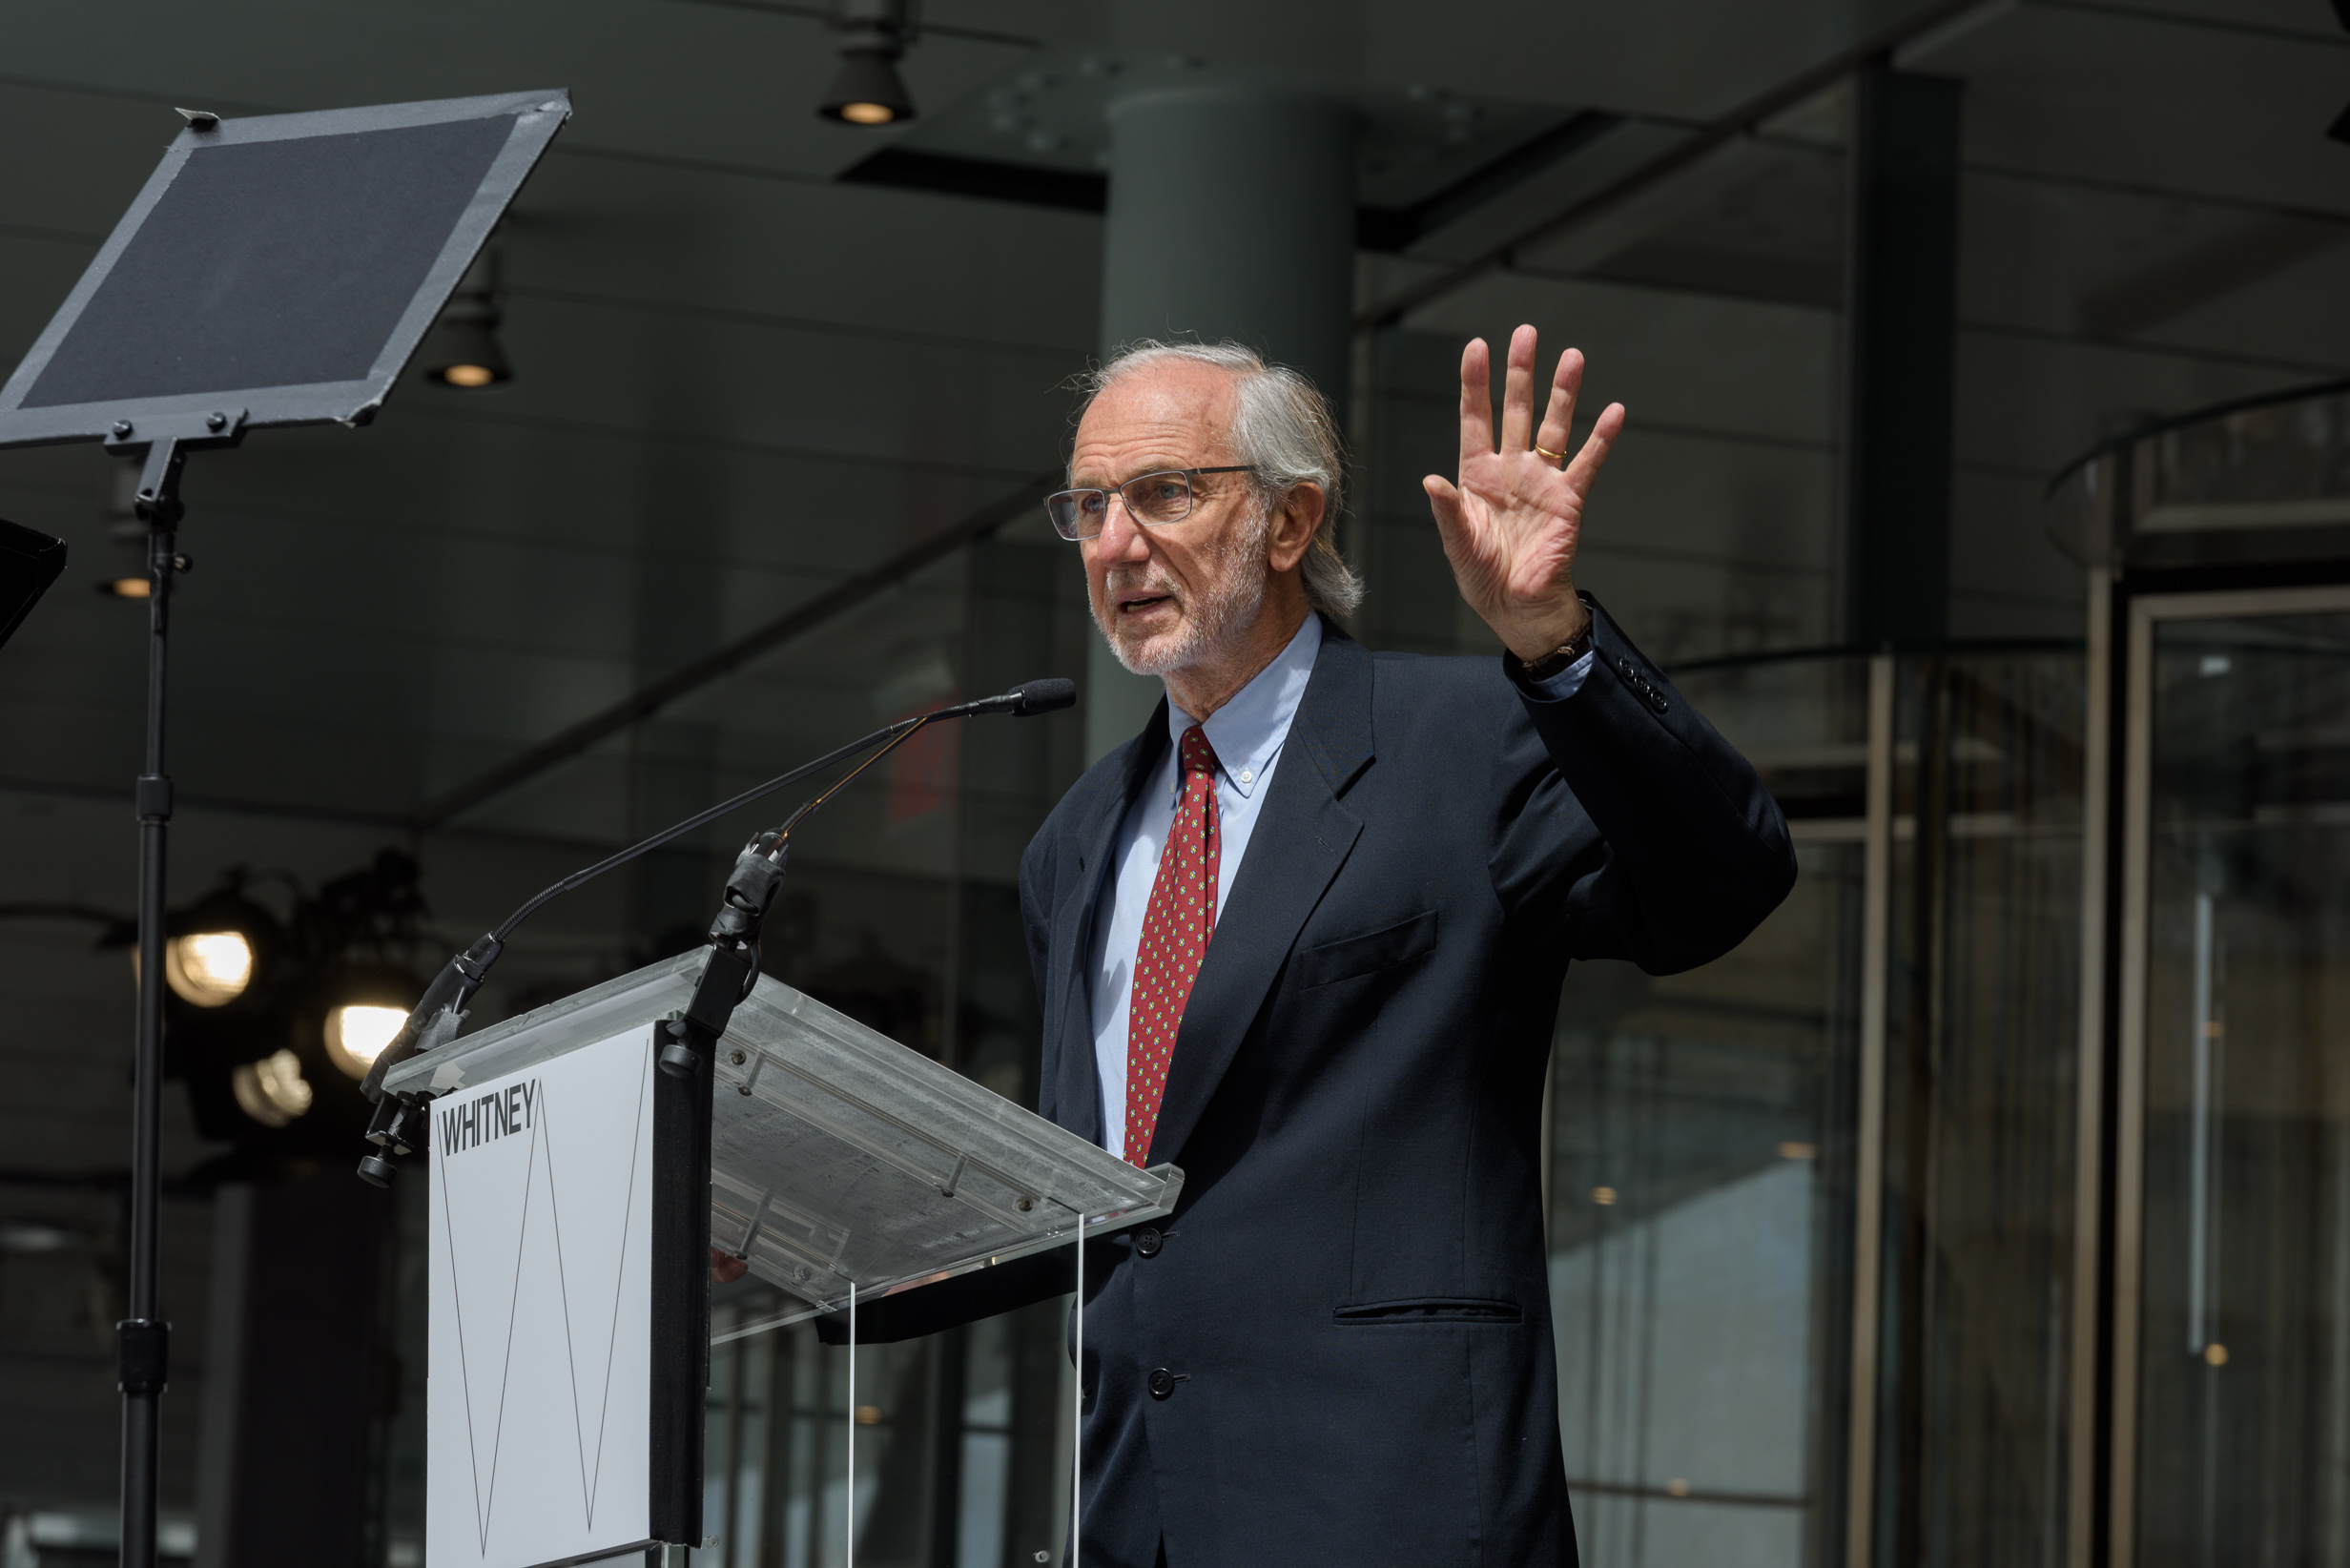 Architect Renzo Piano described the design of the new museum as “flying.”  